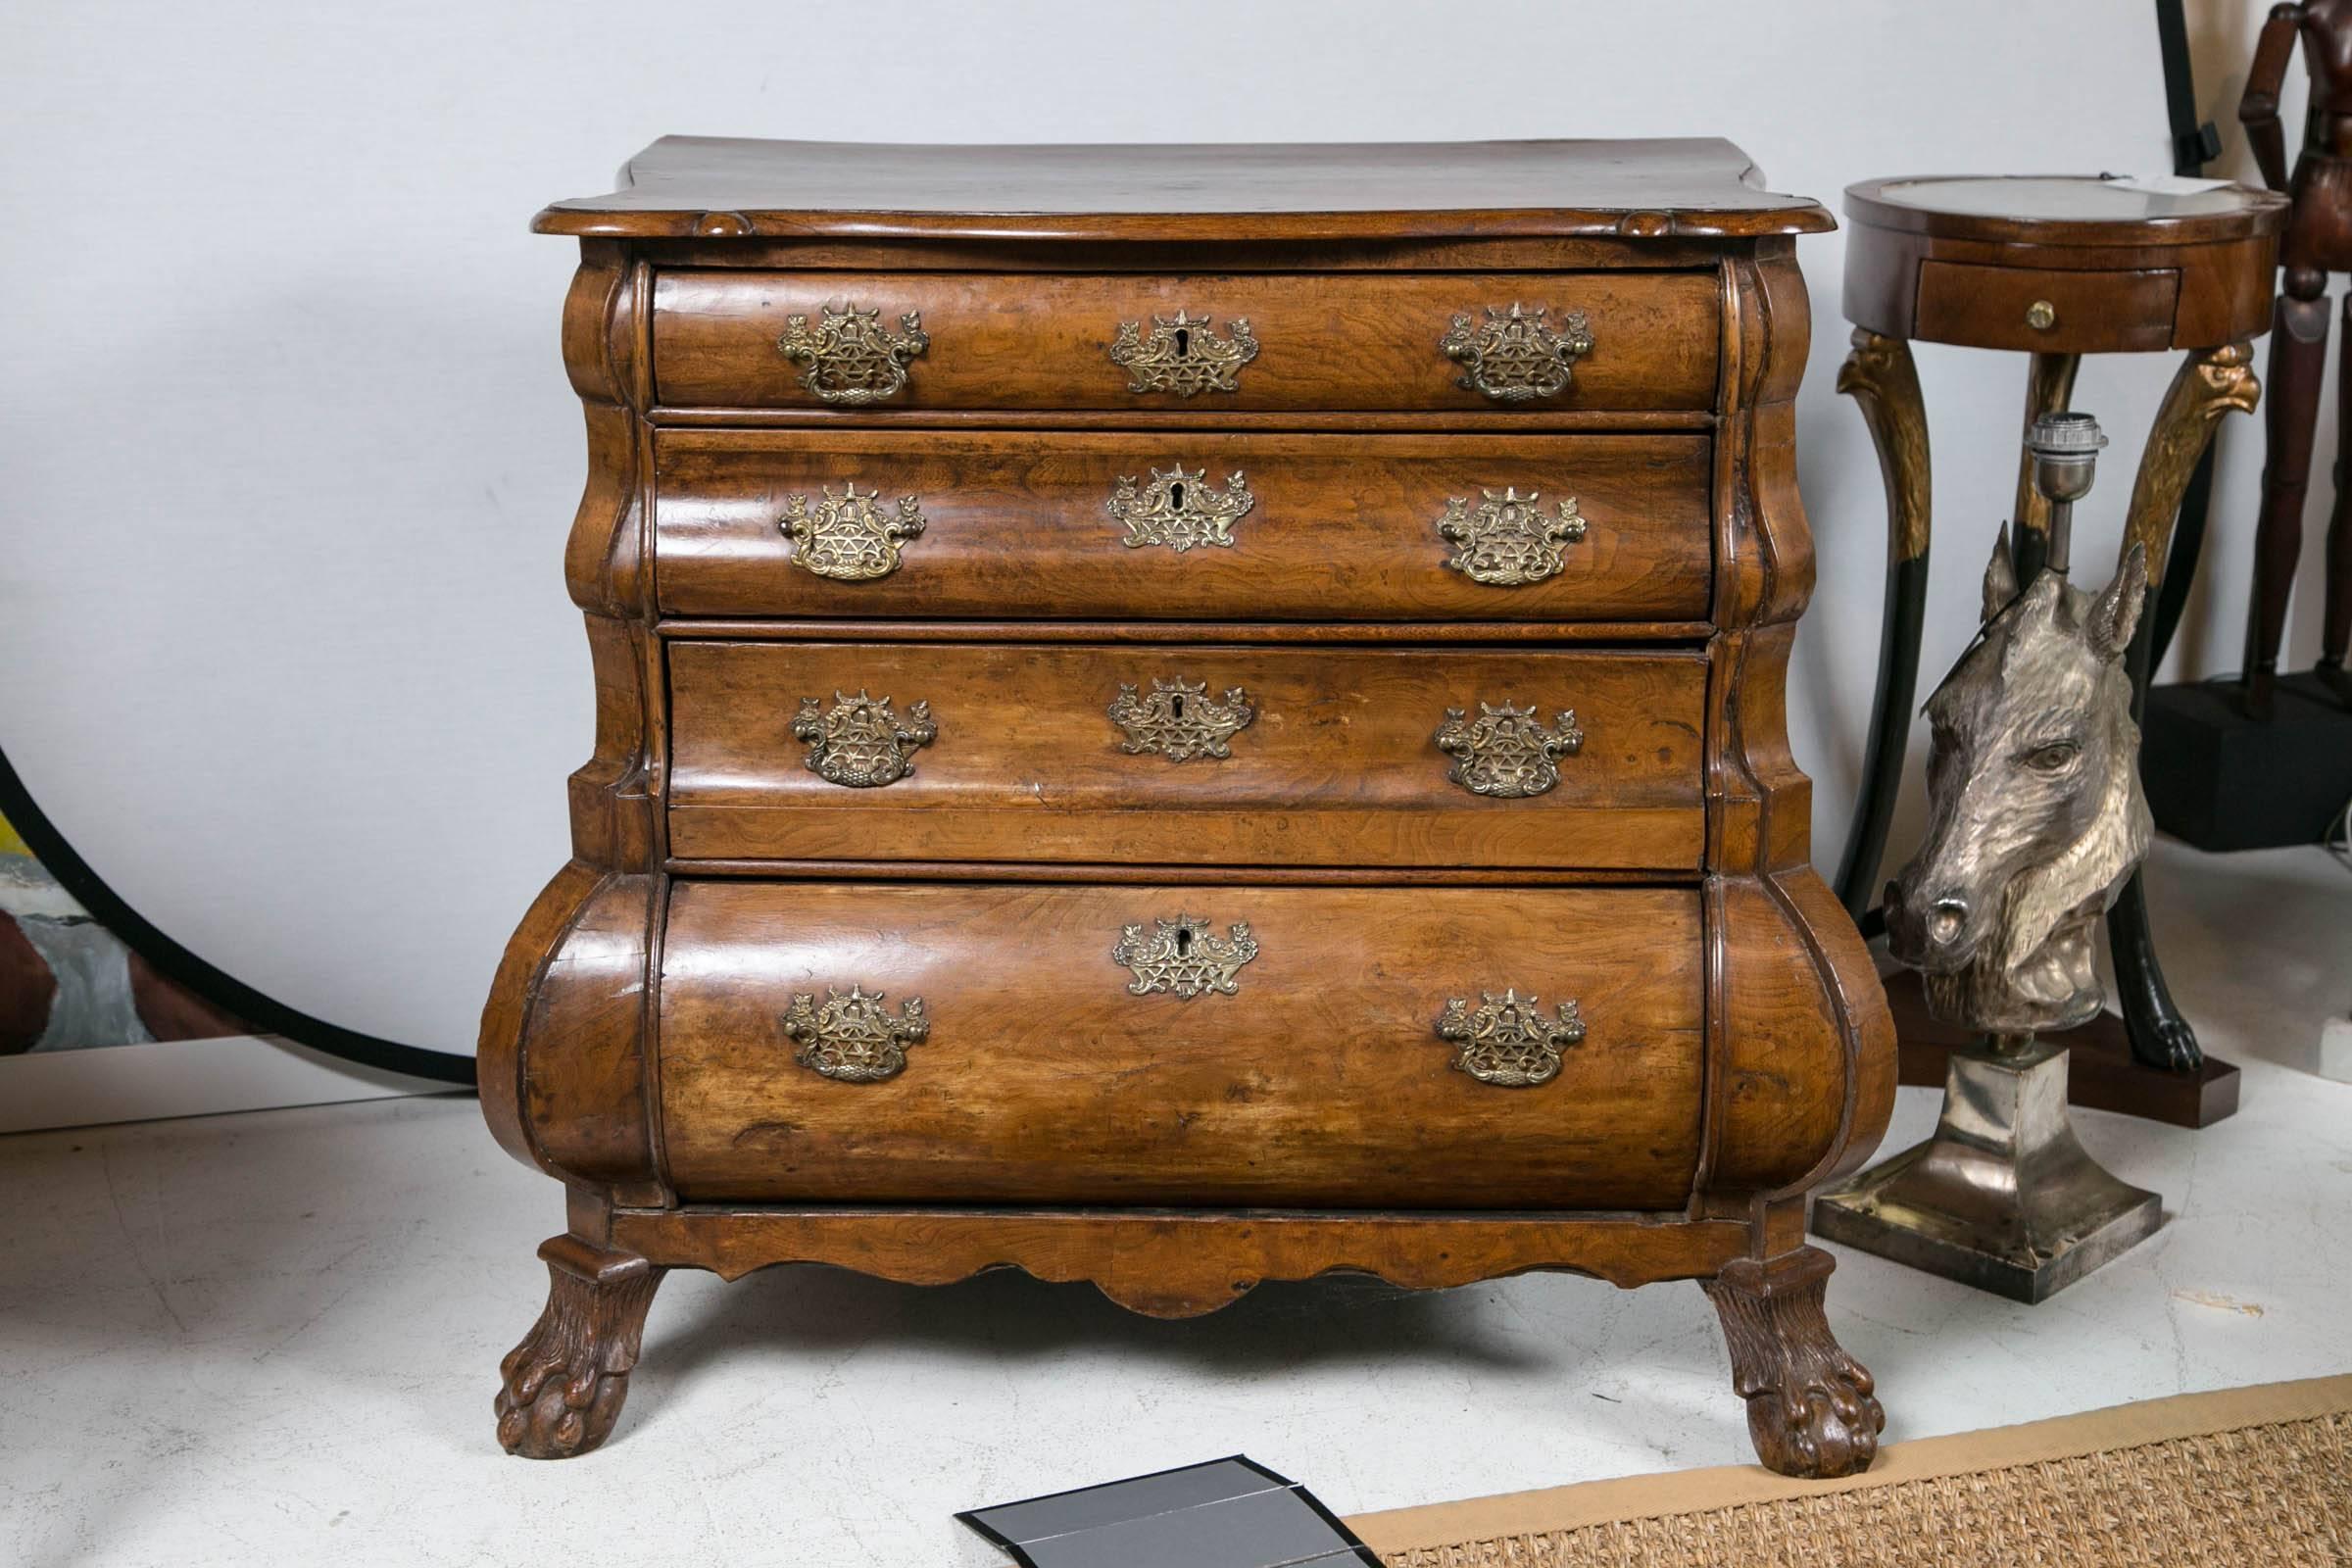 Beautiful 18th century walnut bombe chest on ball and claw feet. Great brasses.